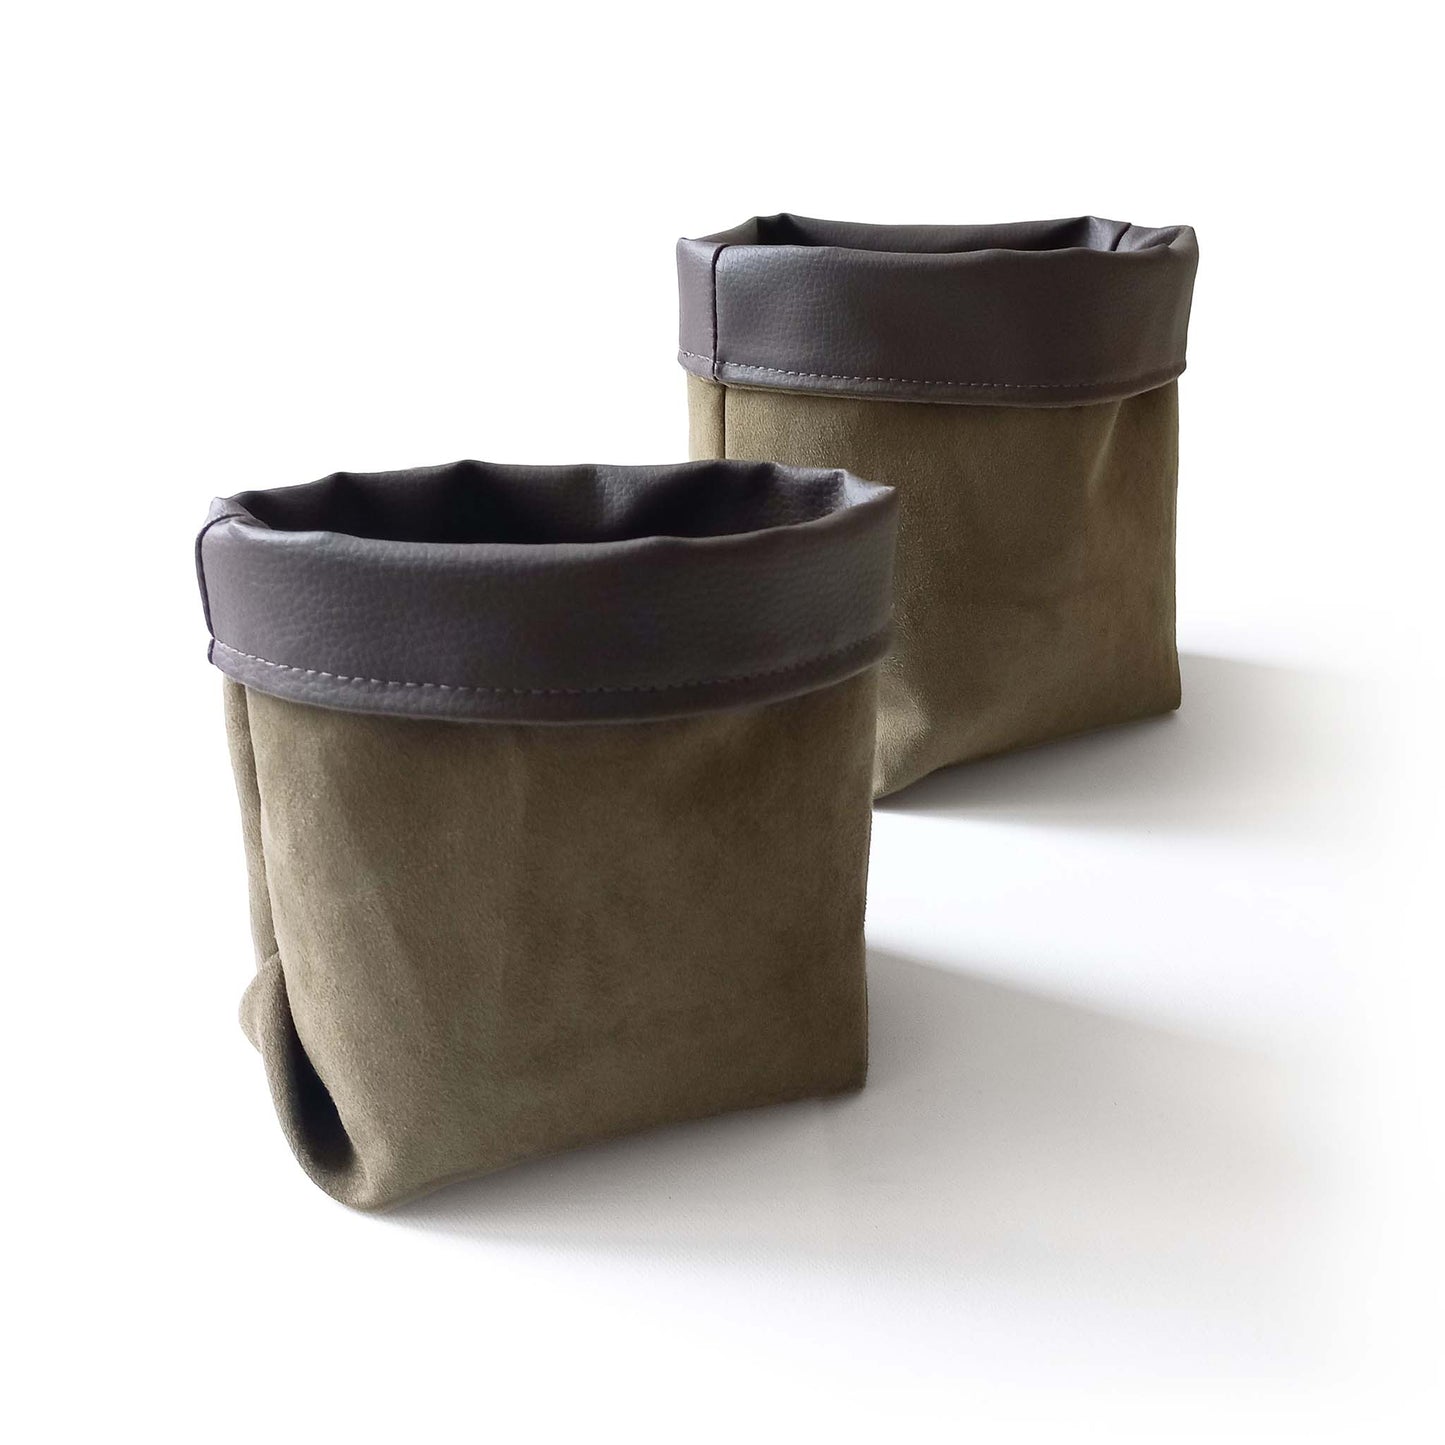 Vegan leather baskets, side view